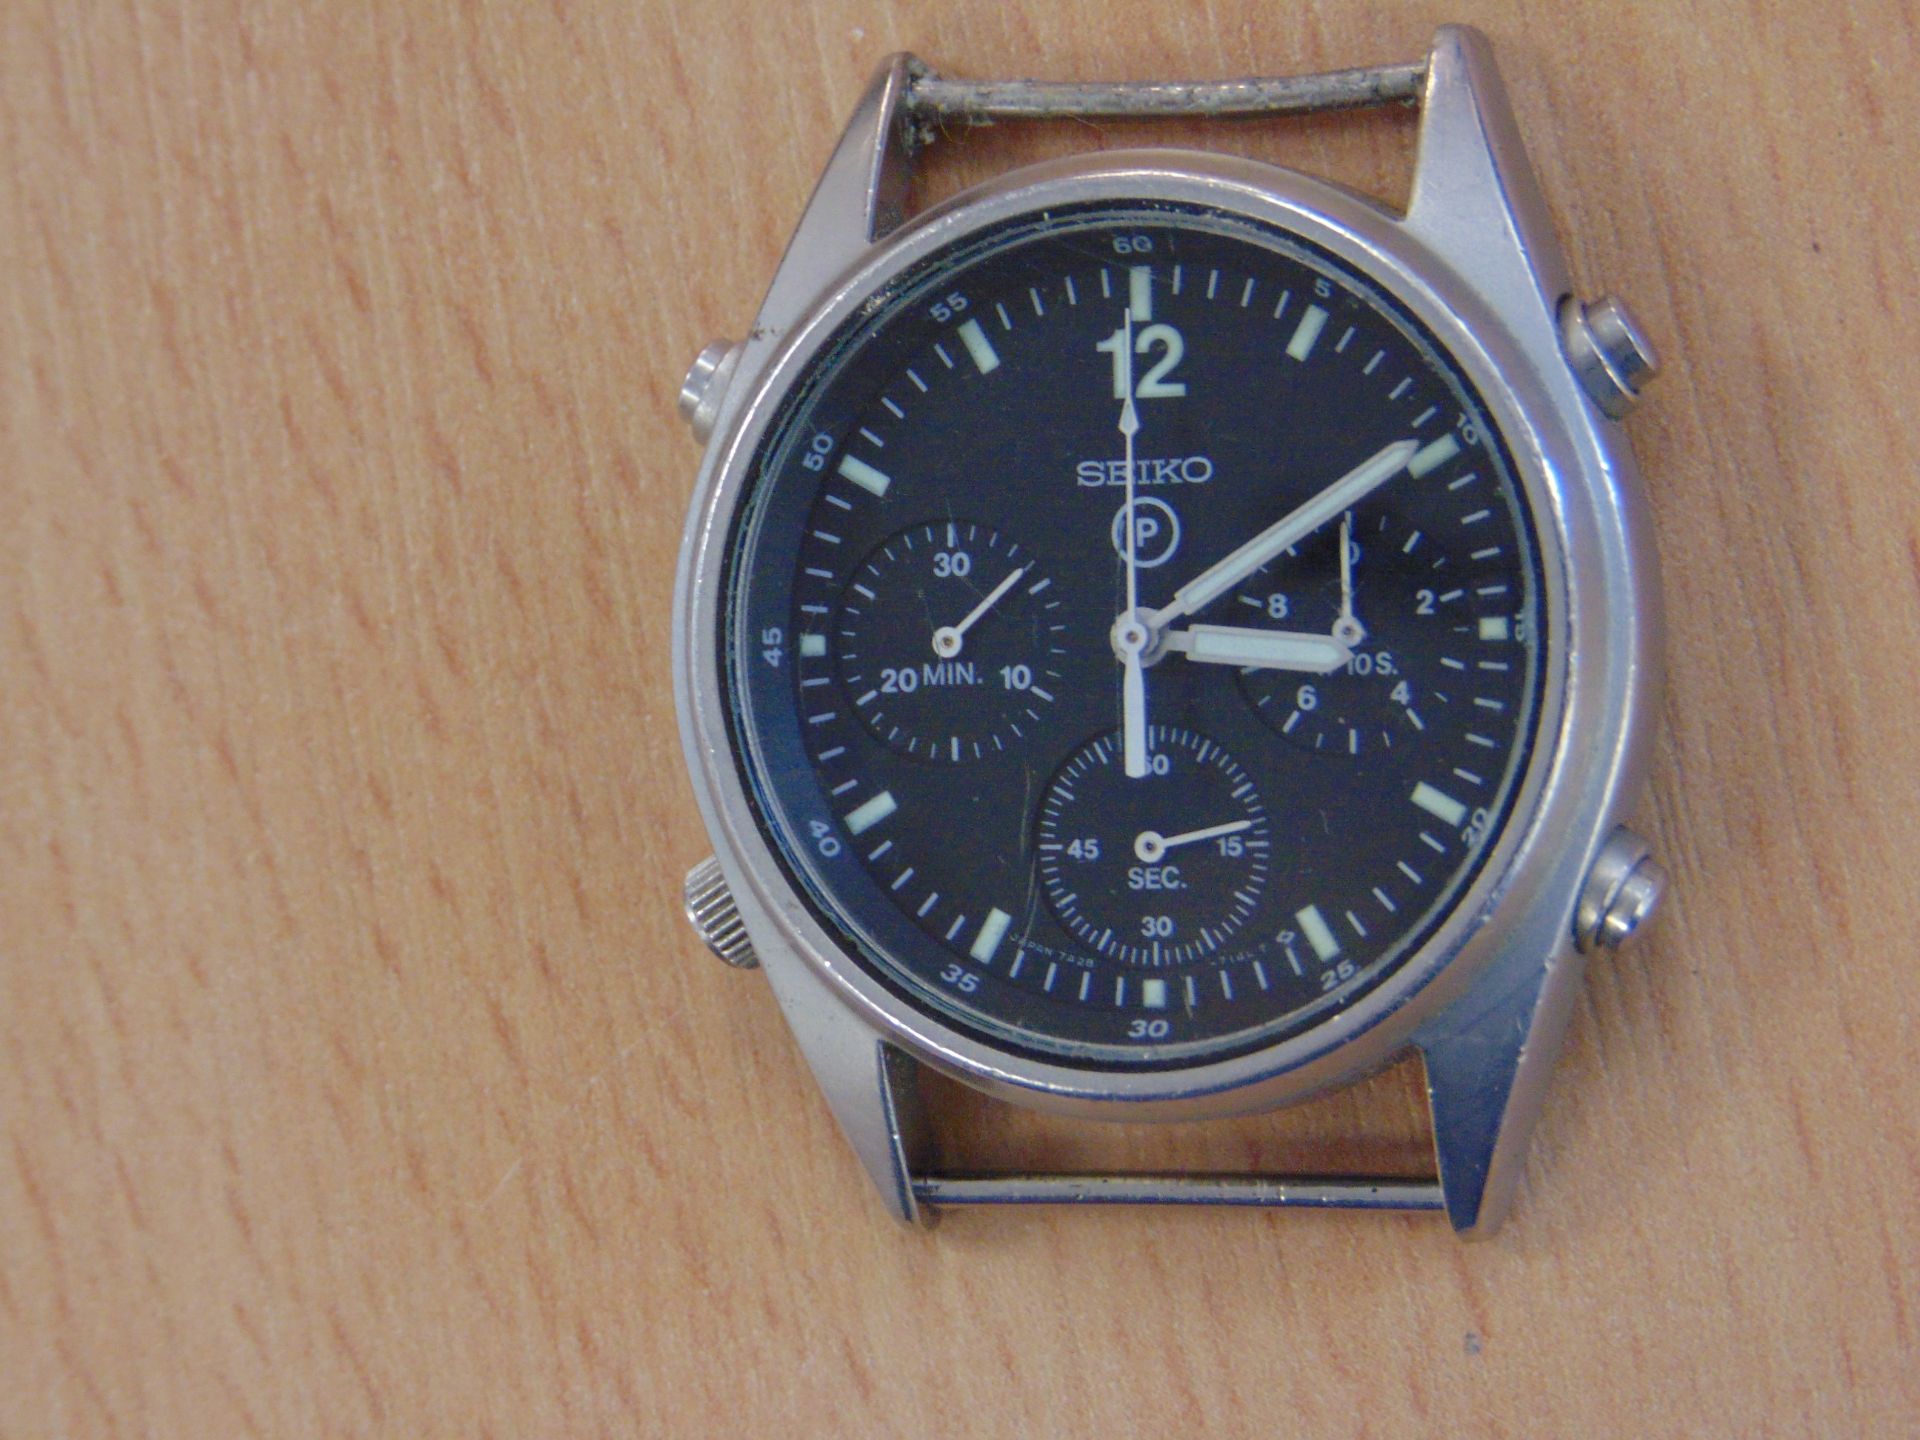 SEIKO GEN 1 PILOTS CHRONO RAF ISSUE WATCH NATO MARKINGS DATED 1989 AS ISSUED TO HARRIER FORCE - Image 4 of 10